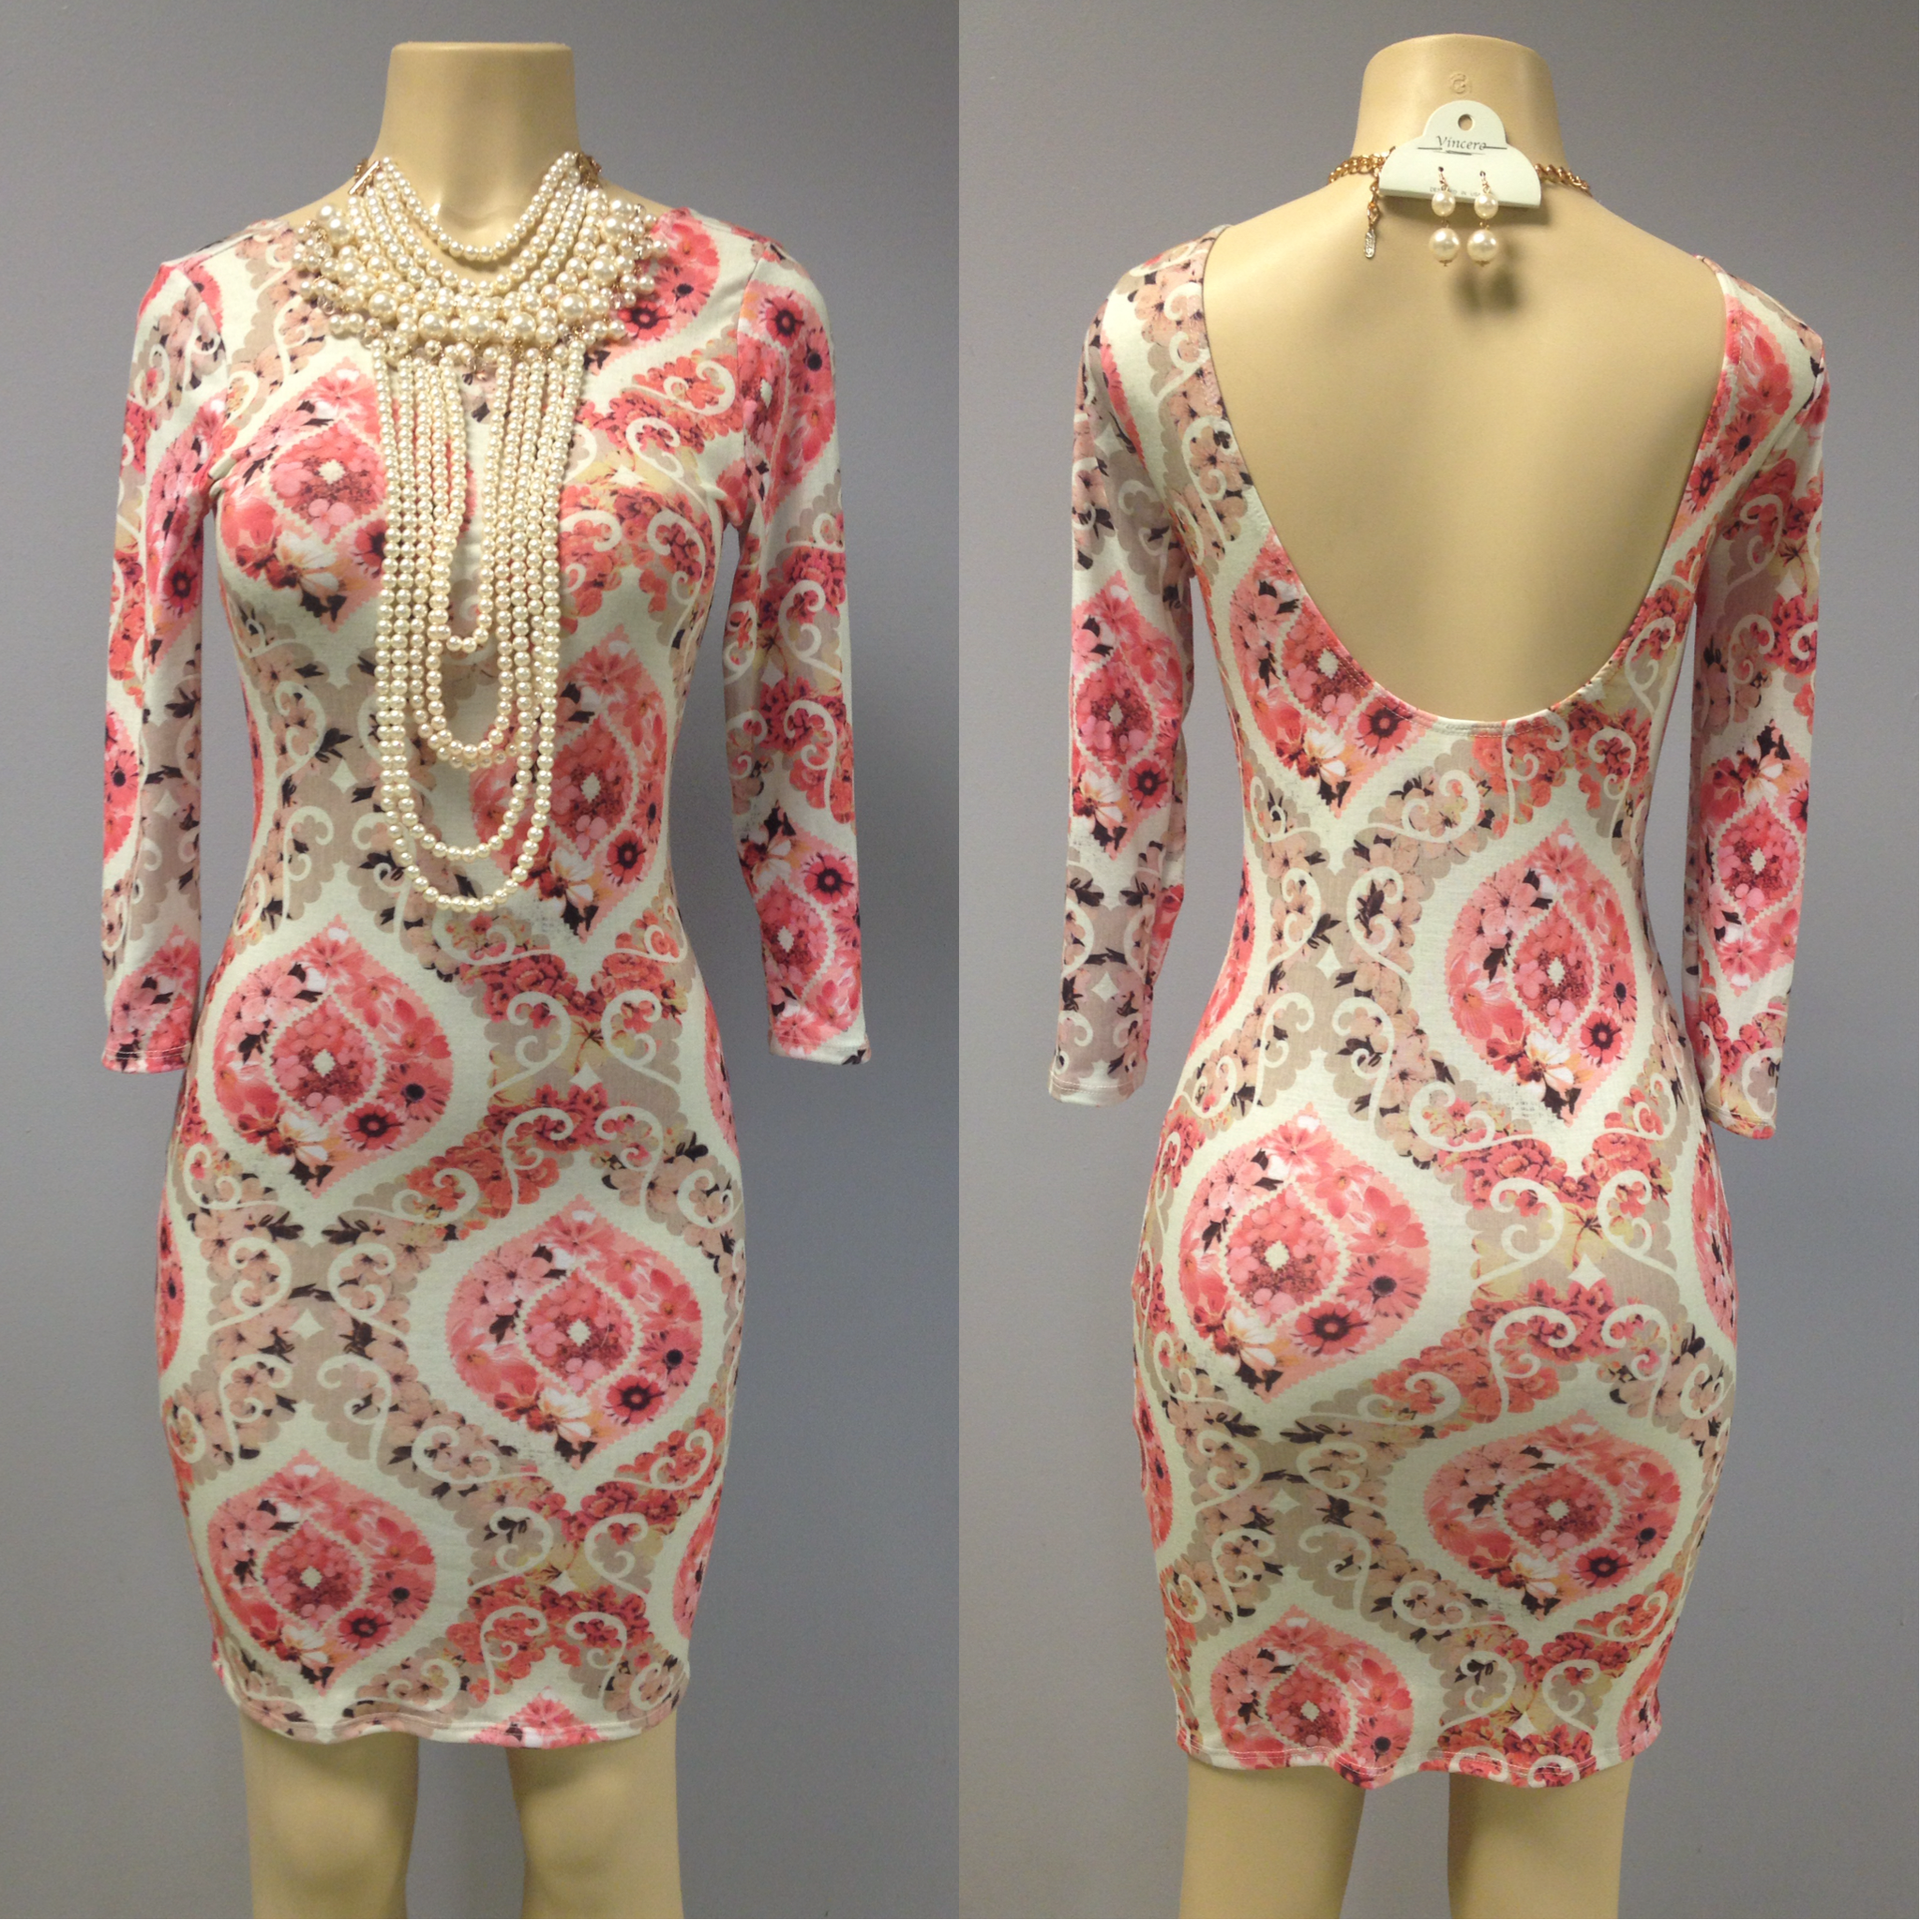 Pink and multi color floral body fitting dress $45